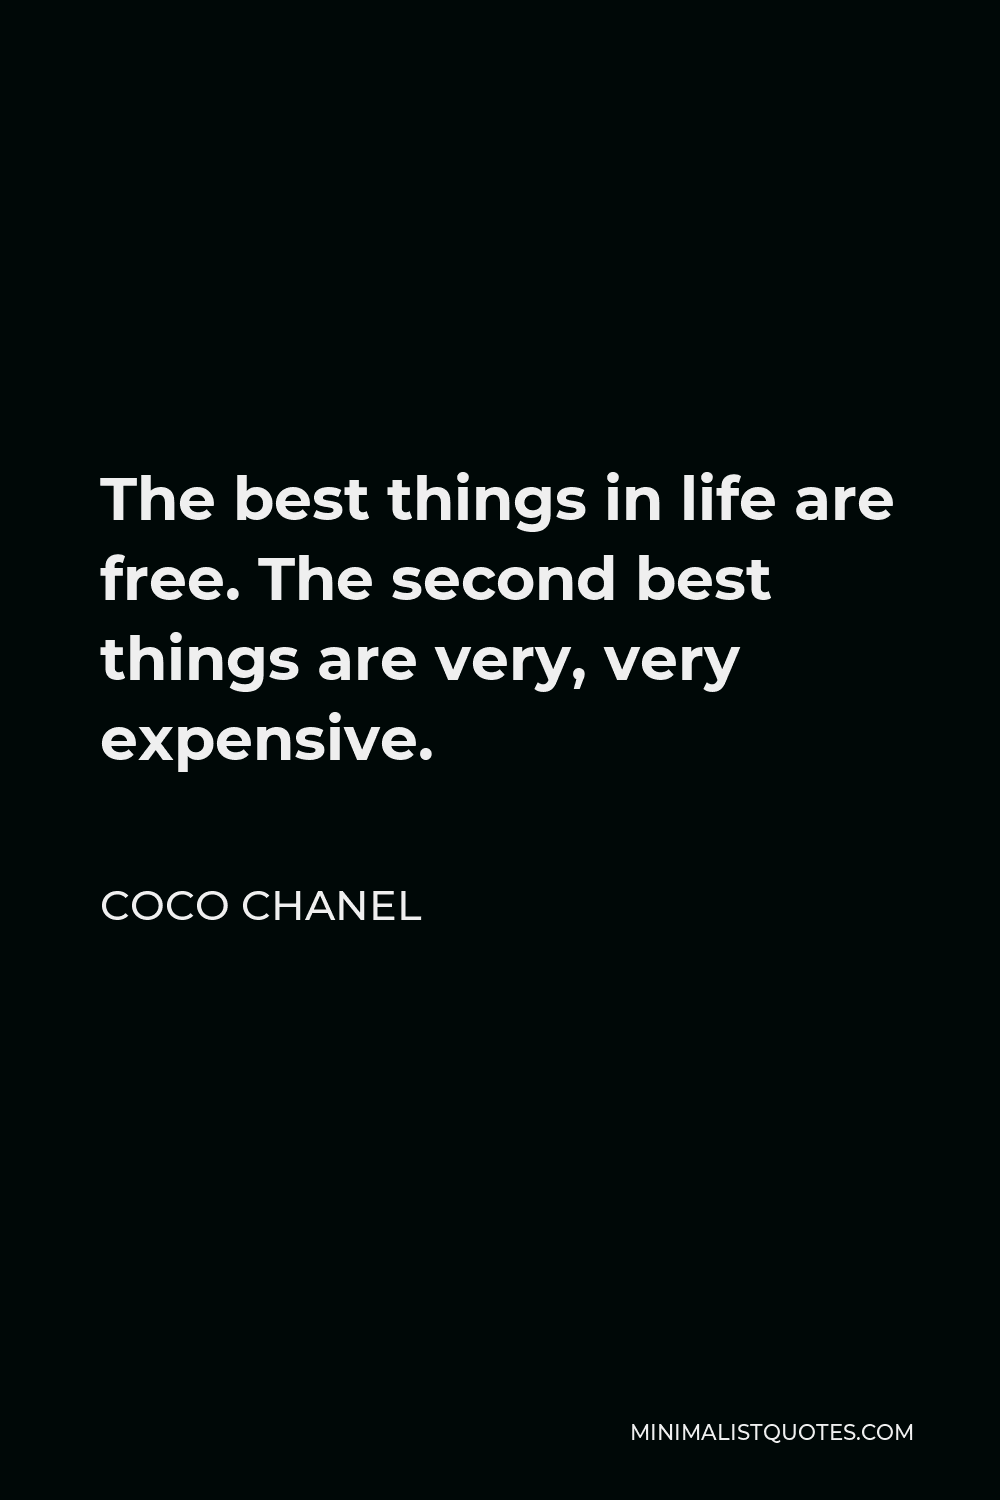 Coco Chanel Quote: The best things in life are free. The second